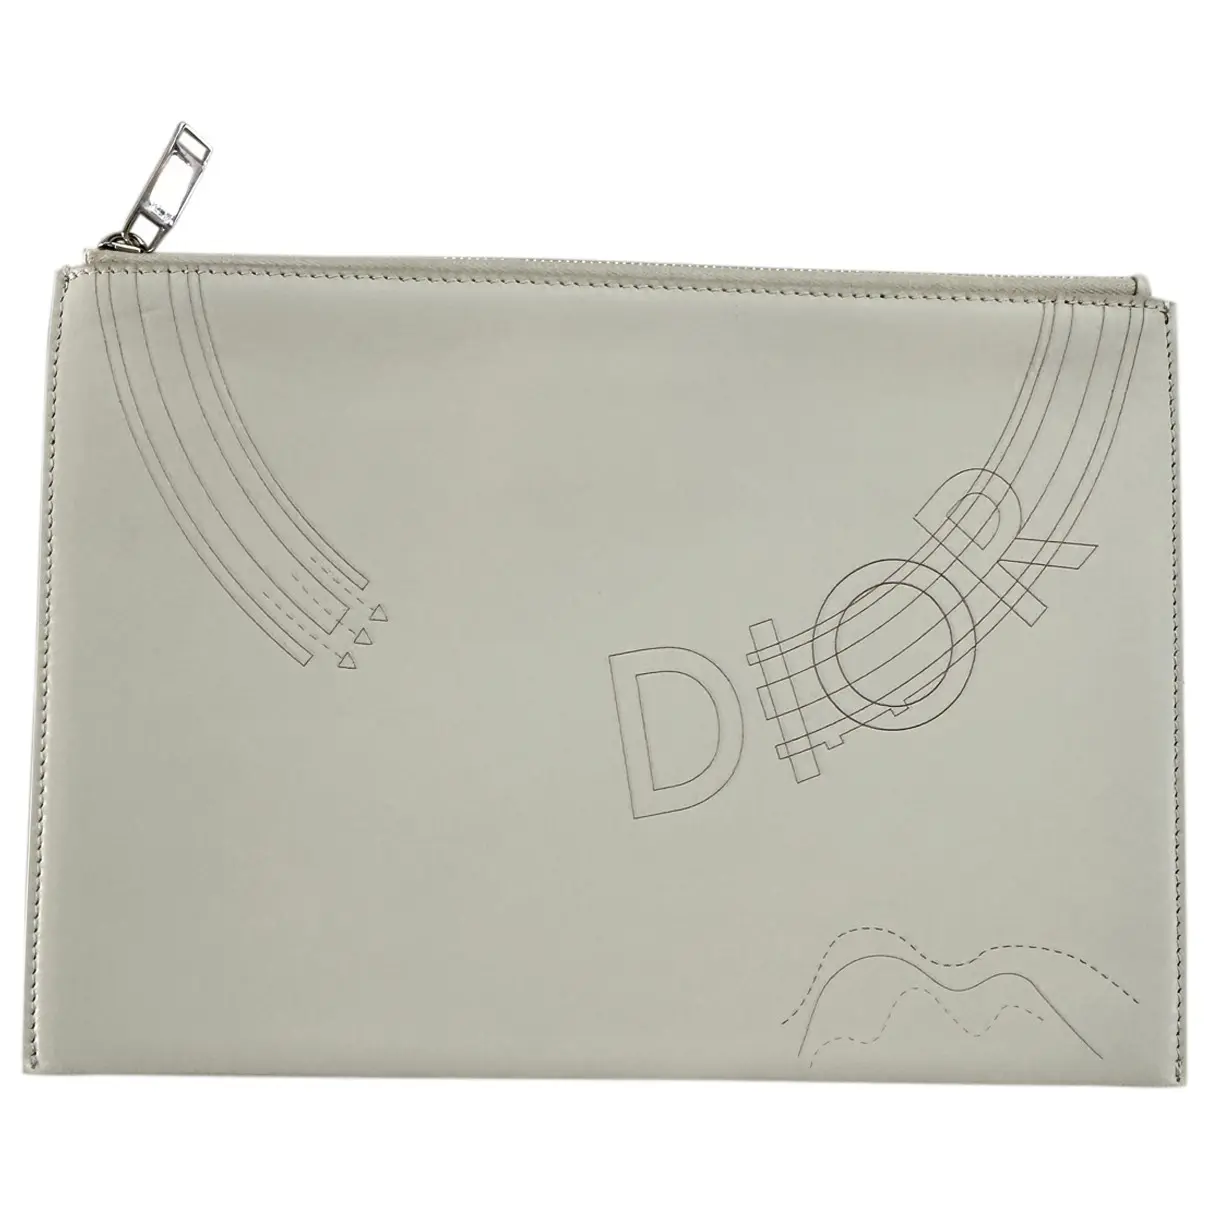 Pouch leather clutch bag Dior